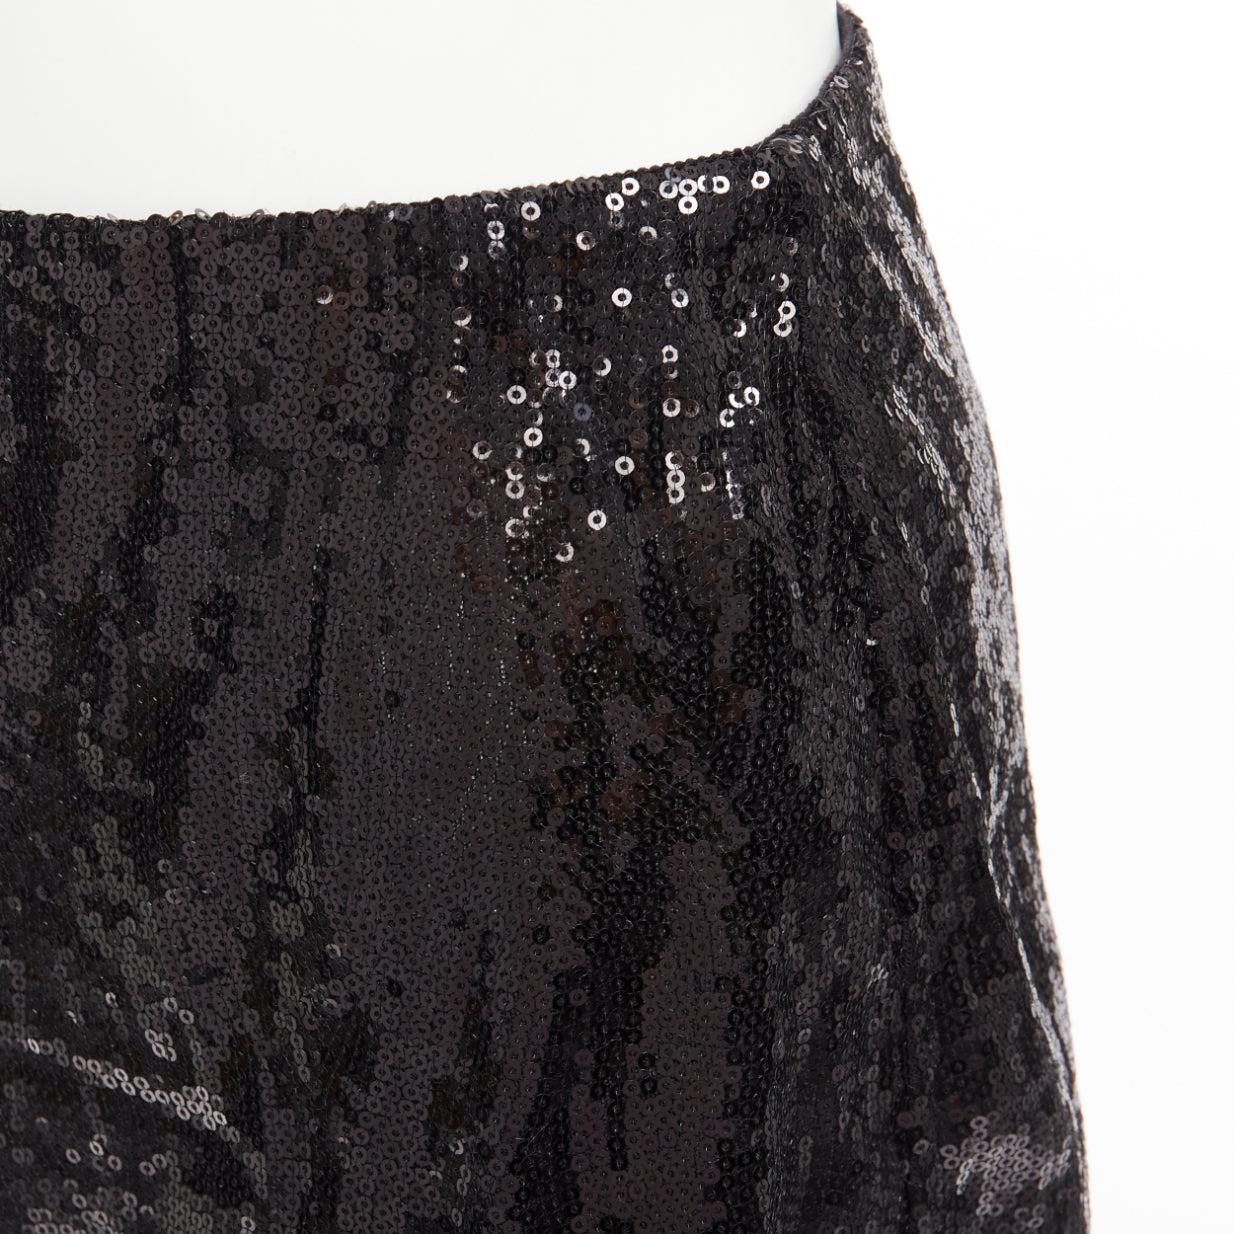 PHILOSOPHY black sequins high waist wide leg relaxed shorts IT38 XS
Reference: AAWC/A00880
Brand: Philosophy
Material: Polyester
Color: Black
Pattern: Sequins
Closure: Zip
Lining: Black Fabric
Extra Details: Front zip.
Made in: